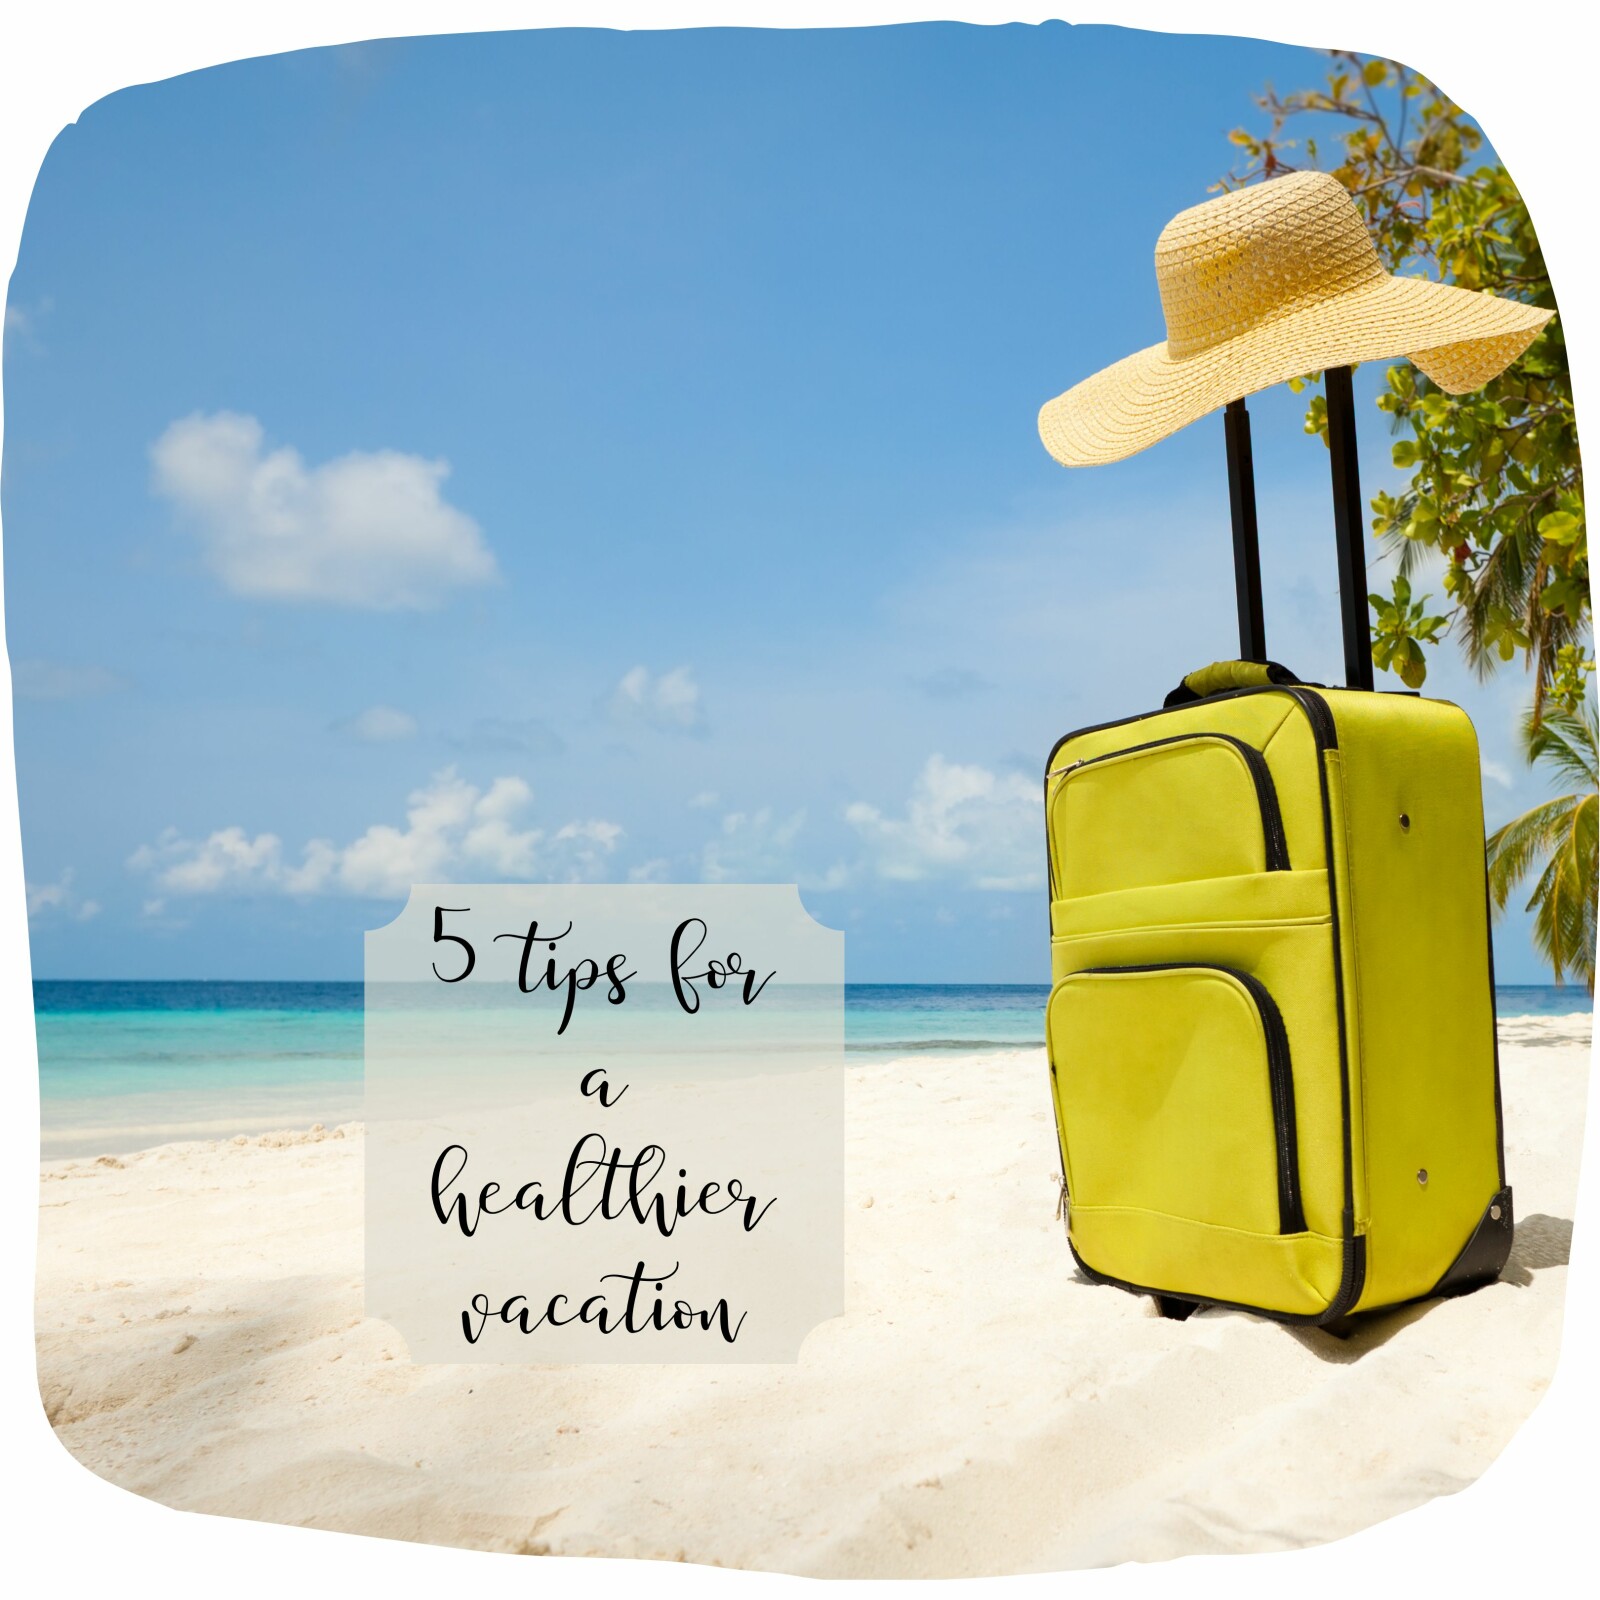 5 Tips for a Healthier Vacation